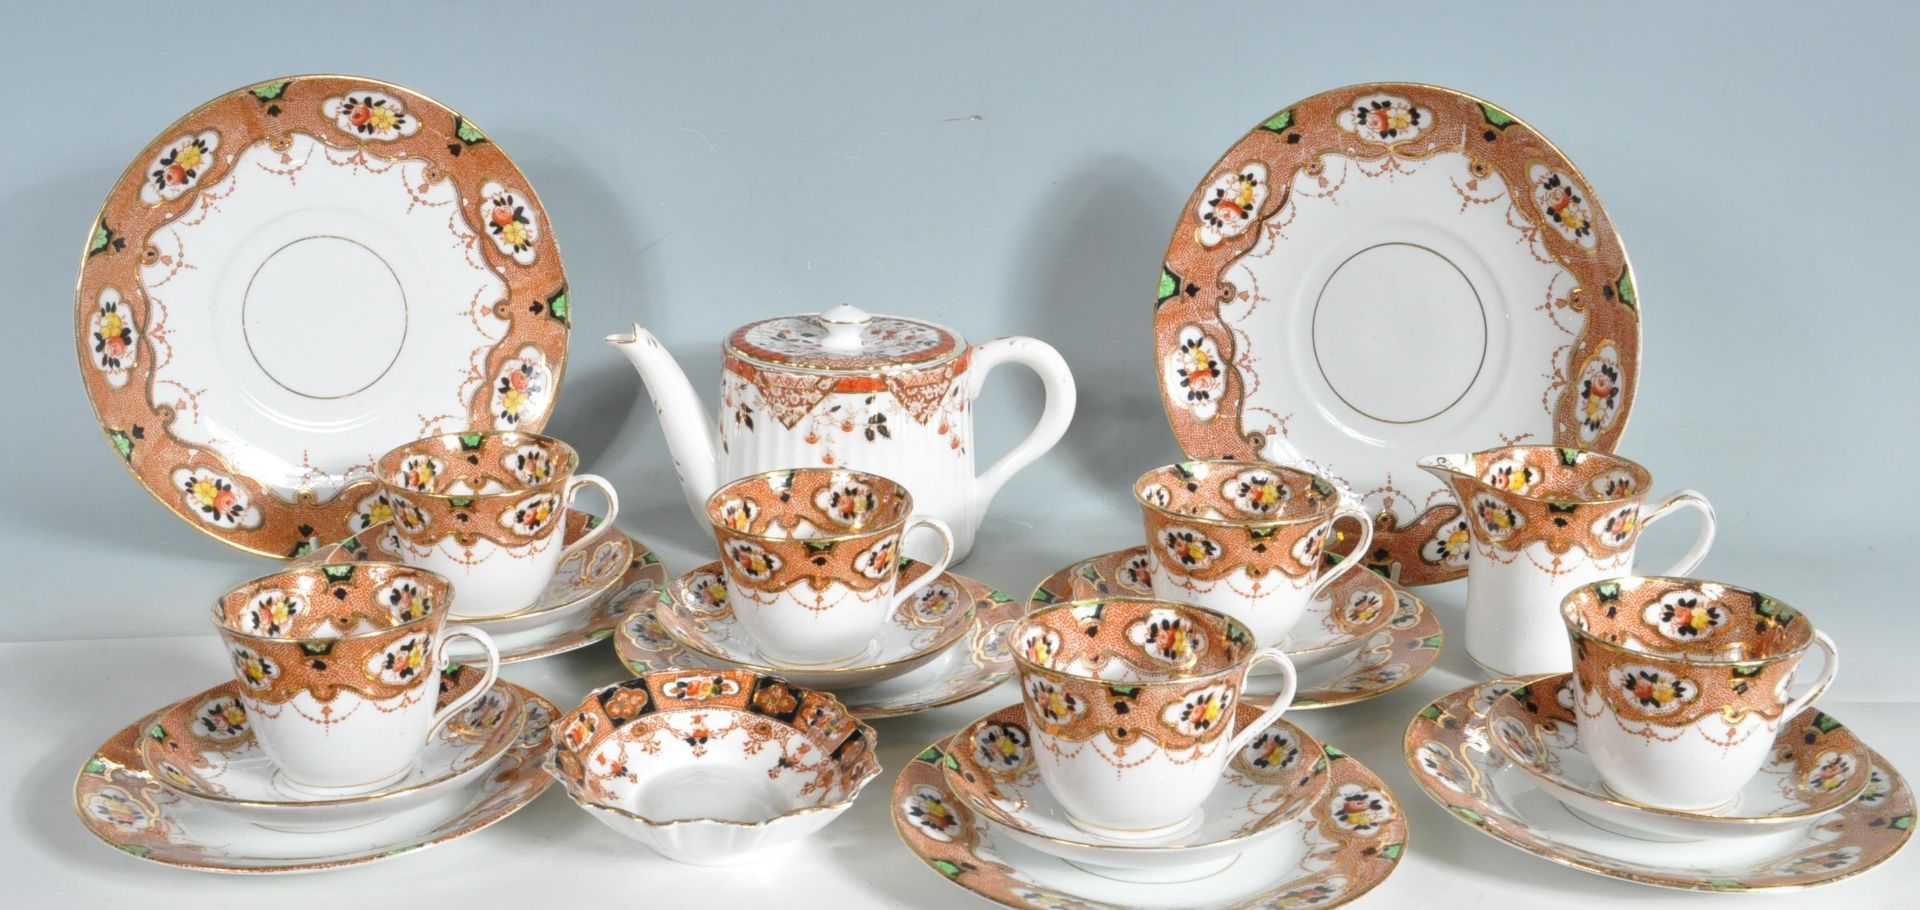 ANTIQUE EARLY 20TH CENTURY ROYAL STAFFORDSHIRE TEA SERVICE